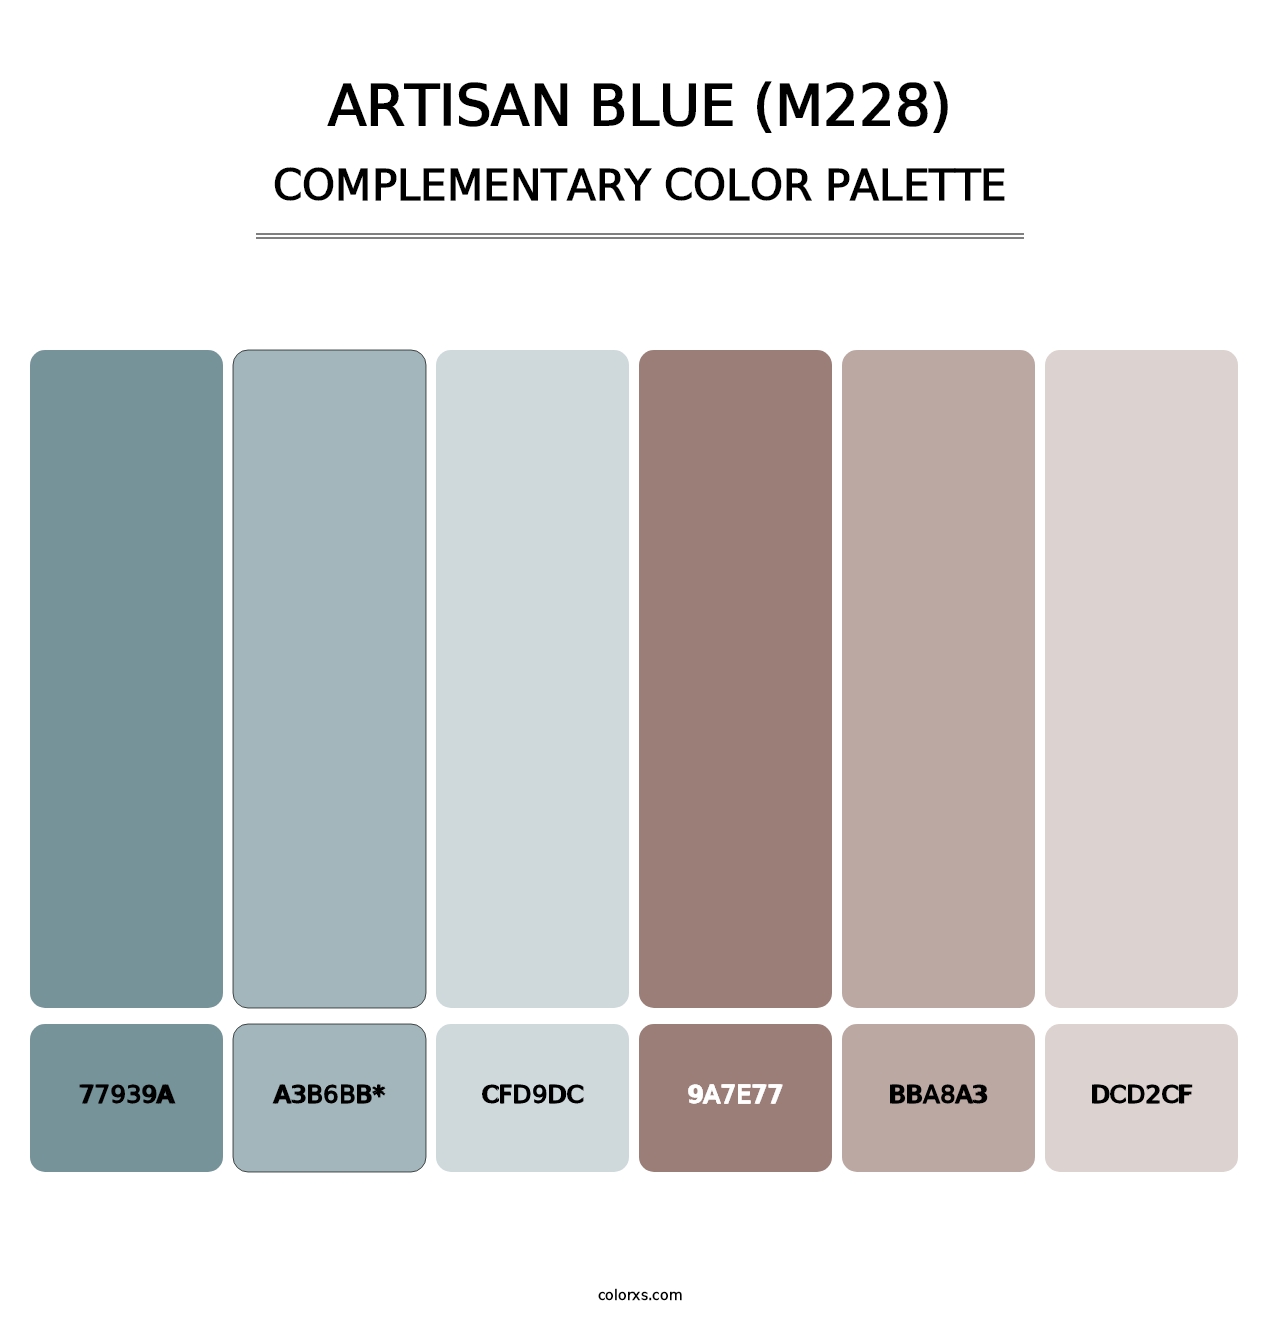 Artisan Blue (M228) - Complementary Color Palette